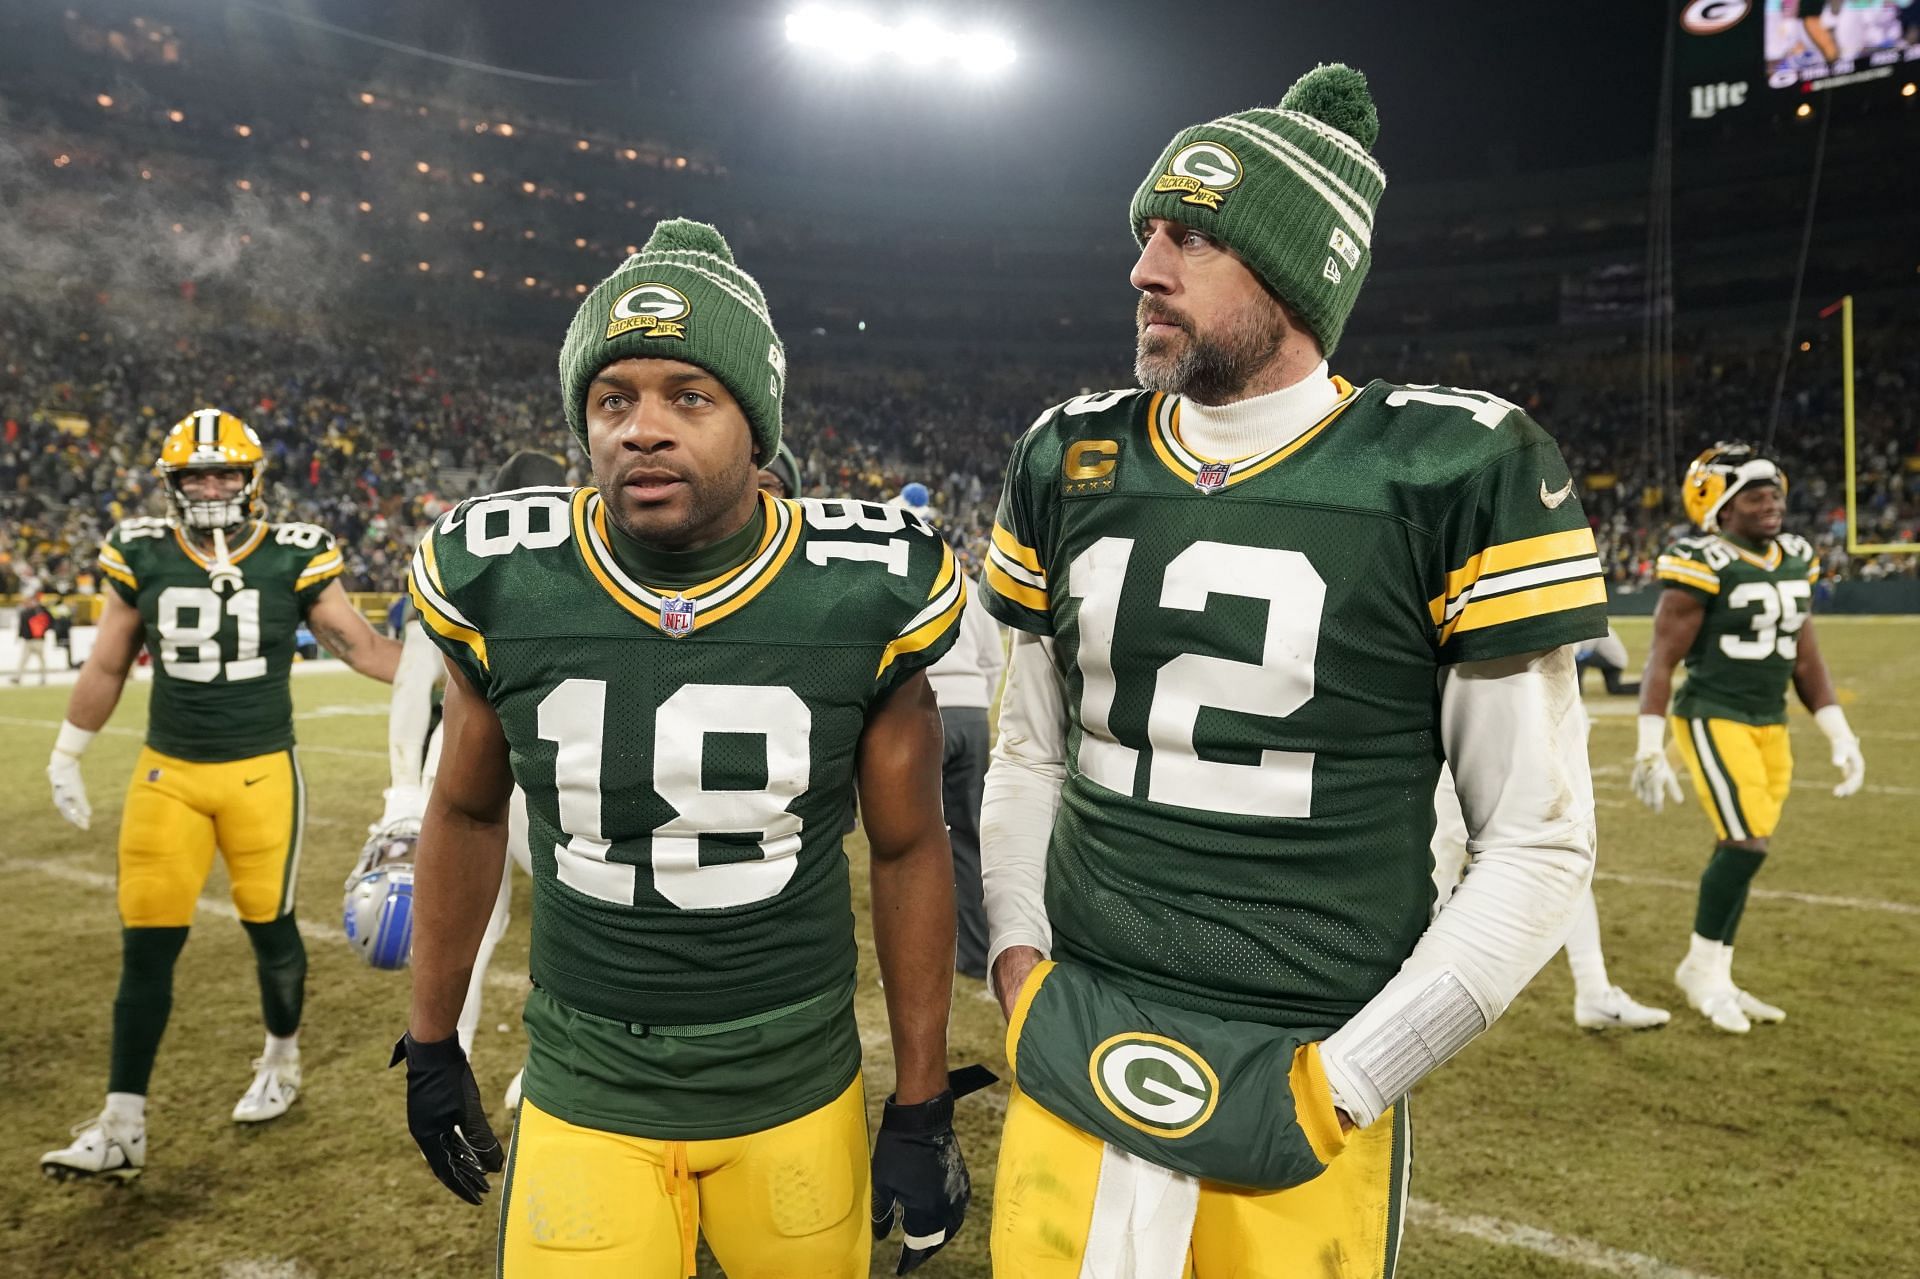 Randall Cobb and Aaron Rodgers Detroit Lions v Green Bay Packers